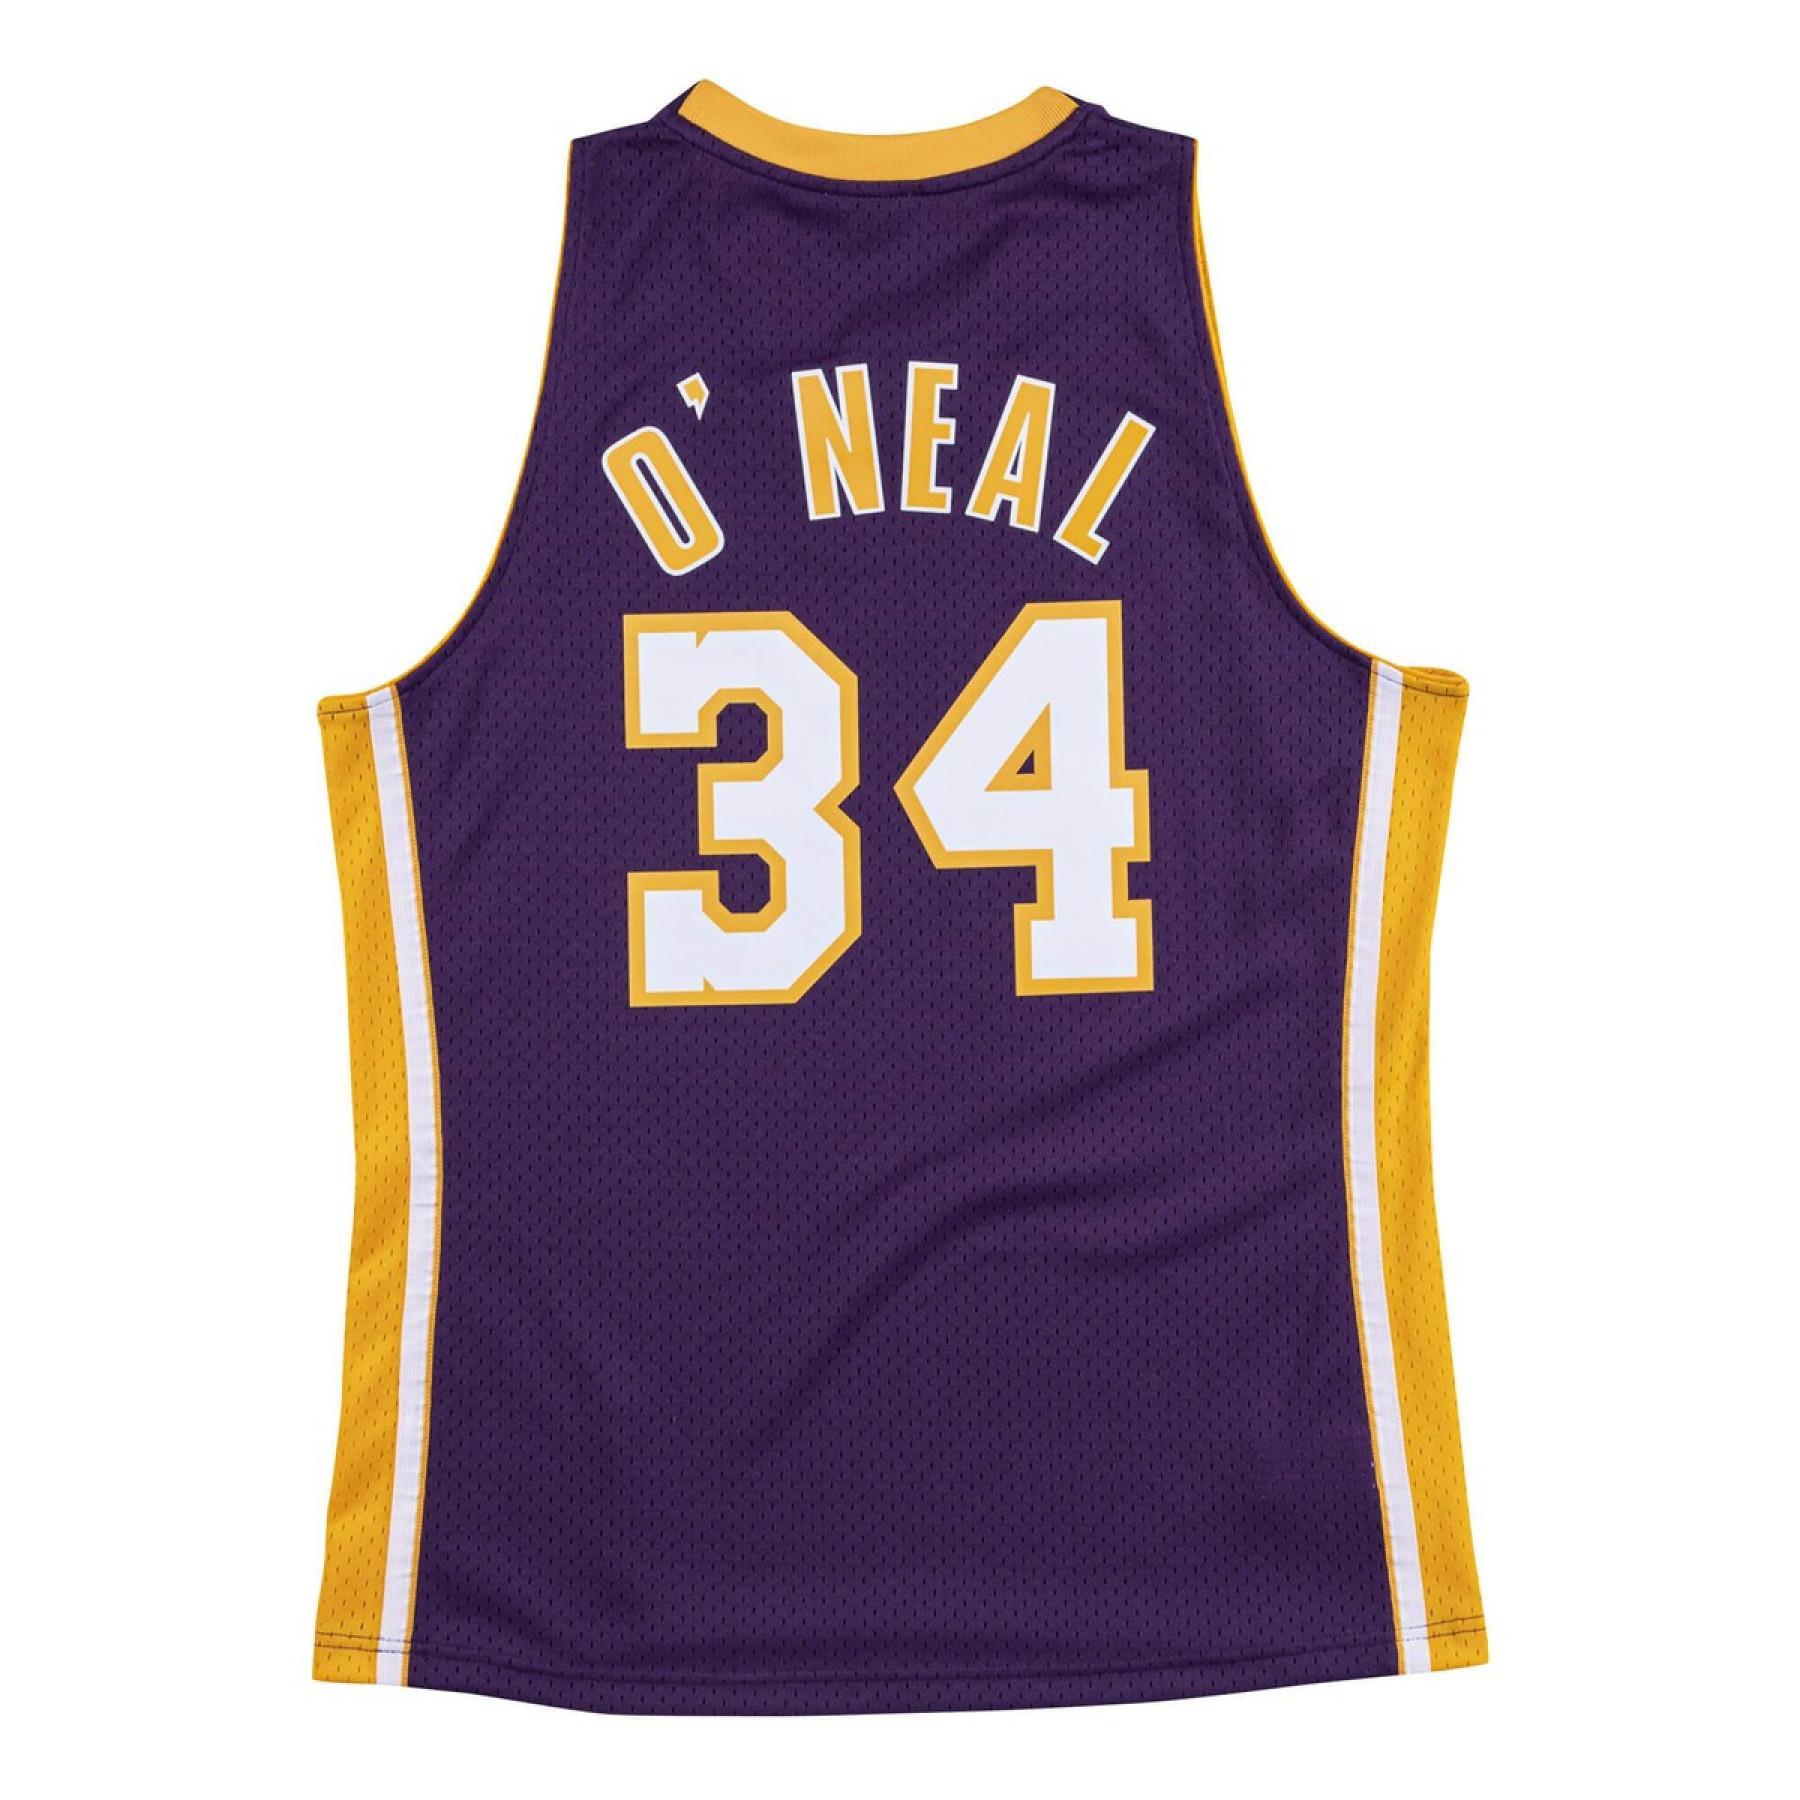 Maillot Los Angeles Lakers nba 1999-00 Shaquille O'Neal